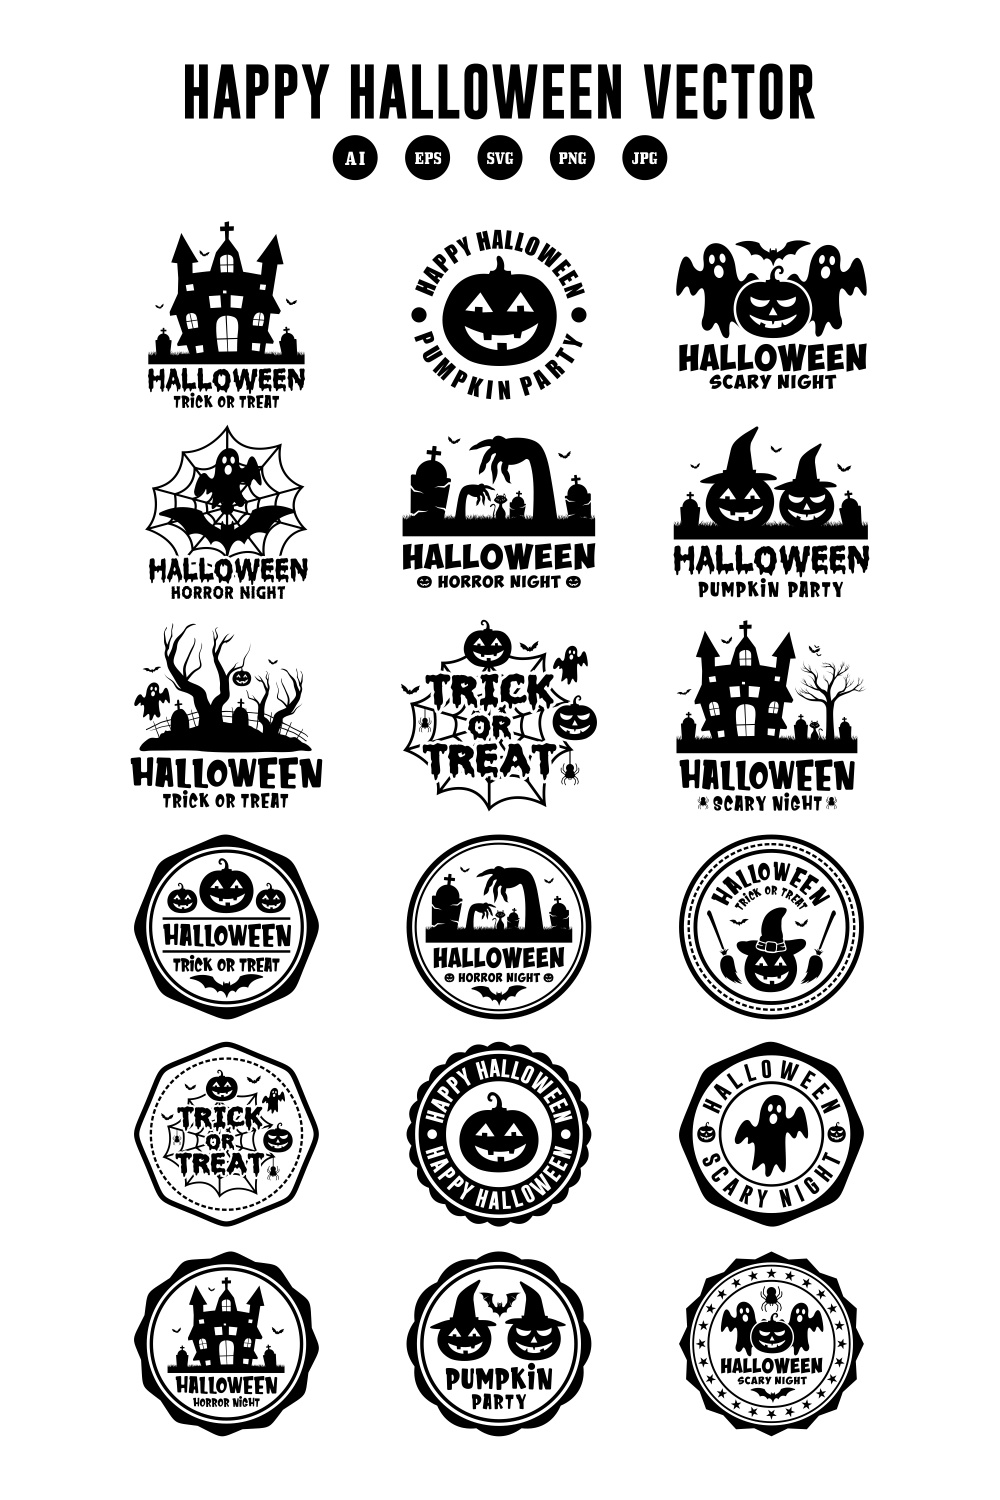 18 Happy Halloween vector silhouette collection - $8 pinterest preview image.